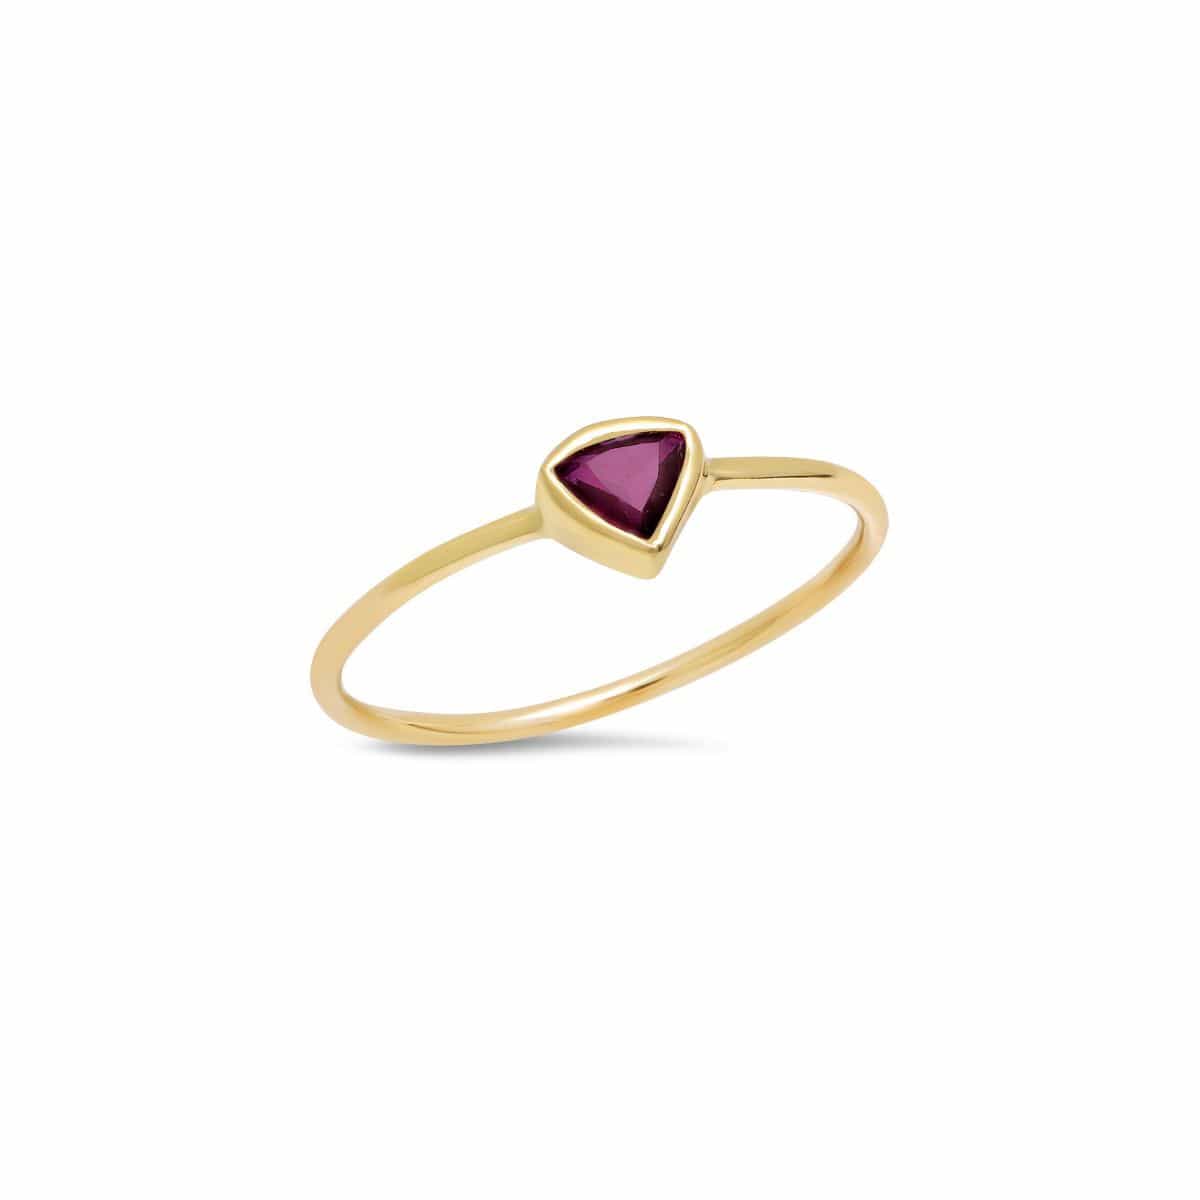 Dark Pink Tourmaline Trillion Cut Yellow Gold Ring Caitlin Nicole Curated Los Angeles